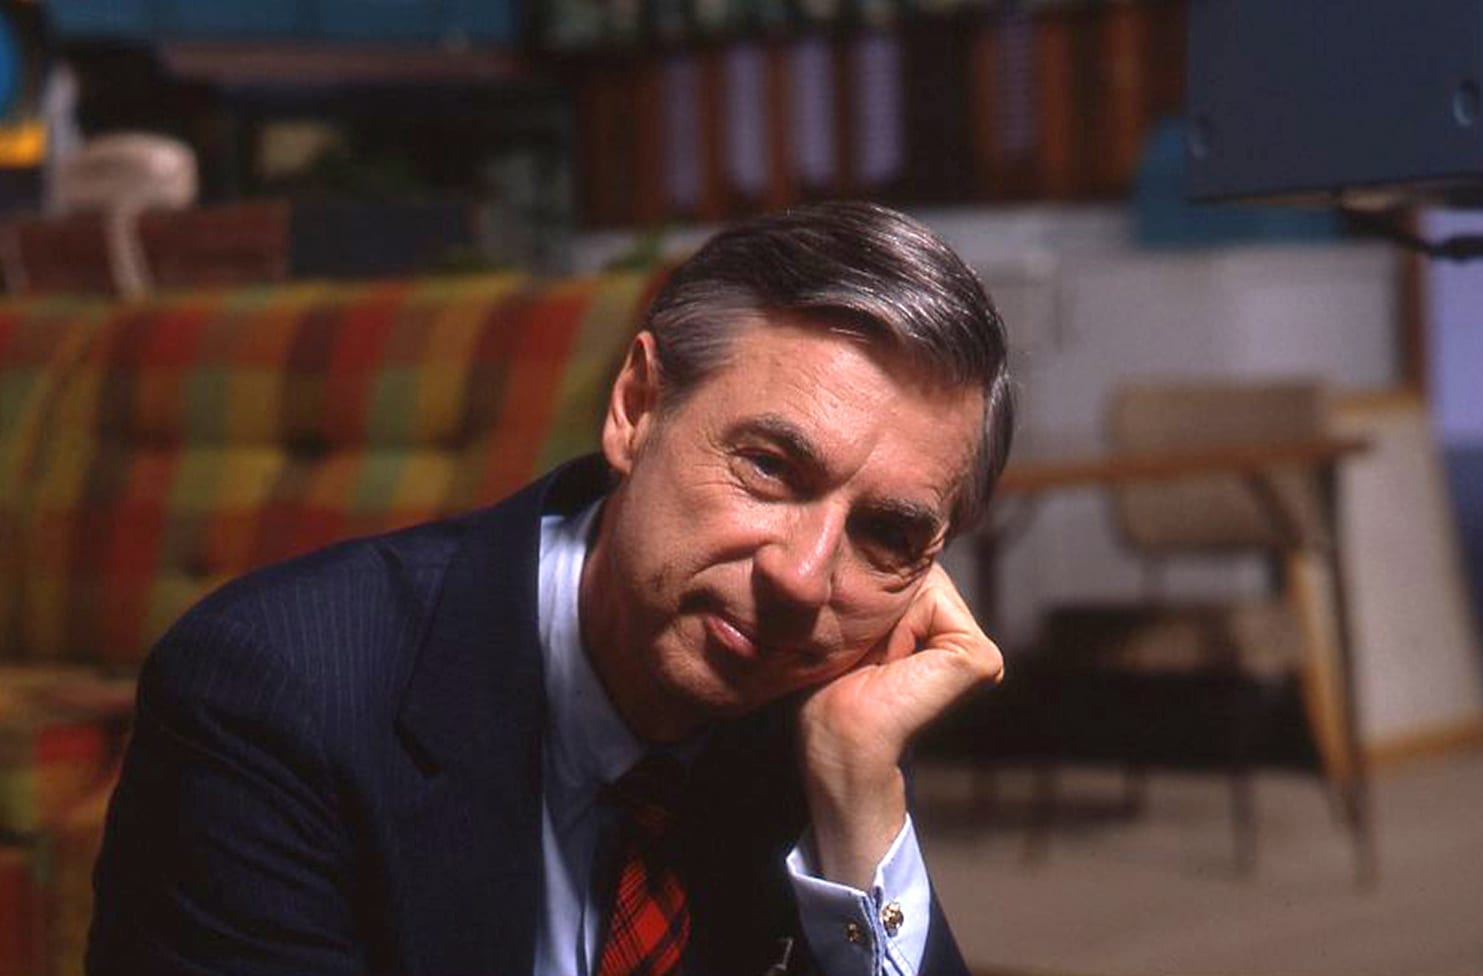 Celebrate the late Fred Rogers’ 90th birthday by watching the official trailer for ‘Won’t You Be My Neighbor?’